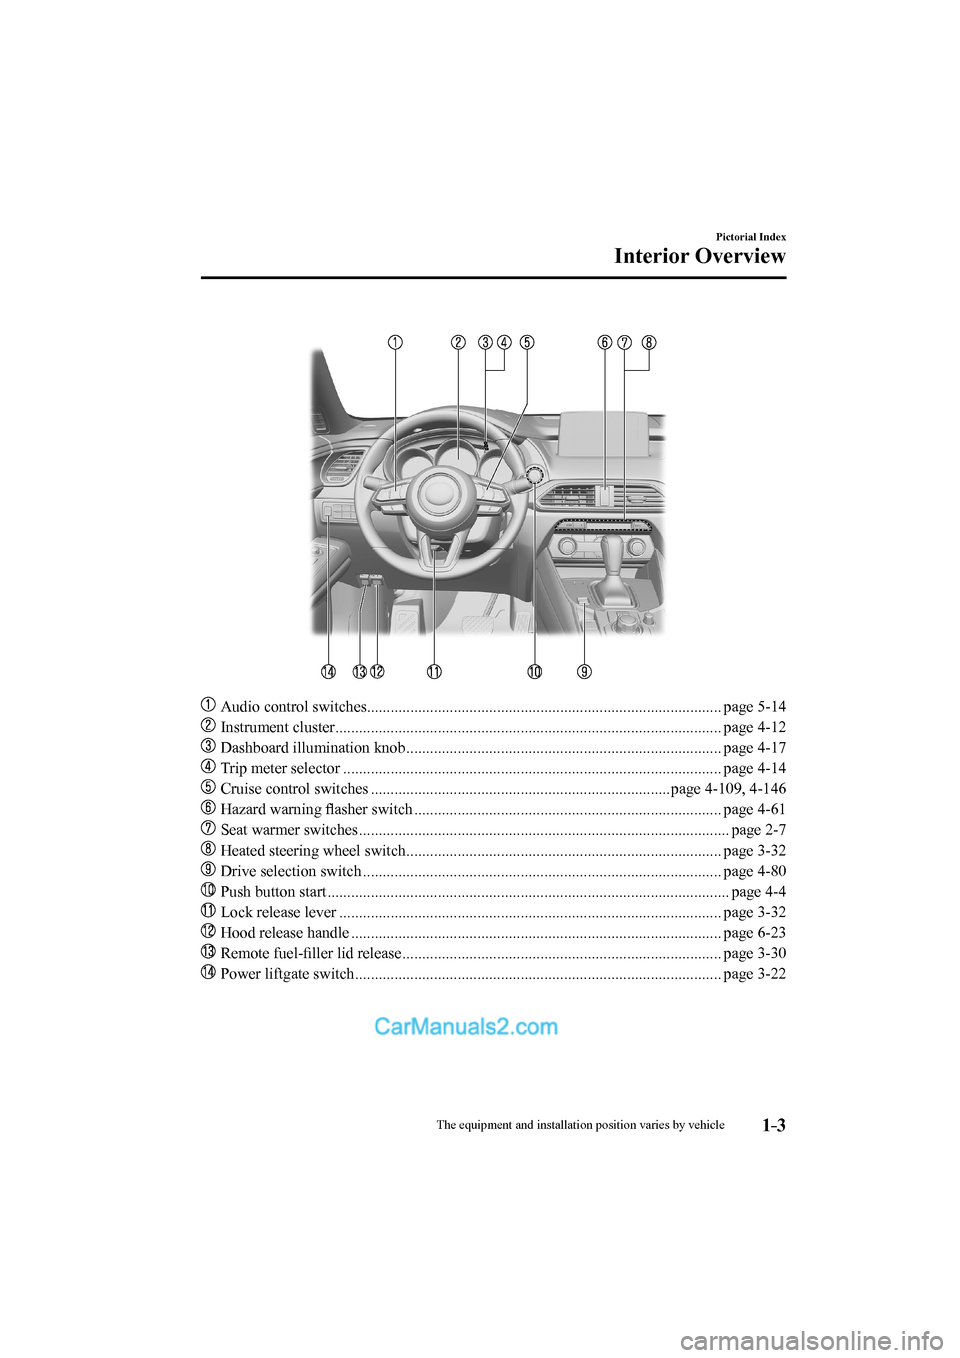 MAZDA MODEL CX-9 2017  Owners Manual (in English) 1–3
Pictorial Index
Interior Overview
   
���
  Audio control switches.......................................................................................... page  5-14 
��
  Instrument clus